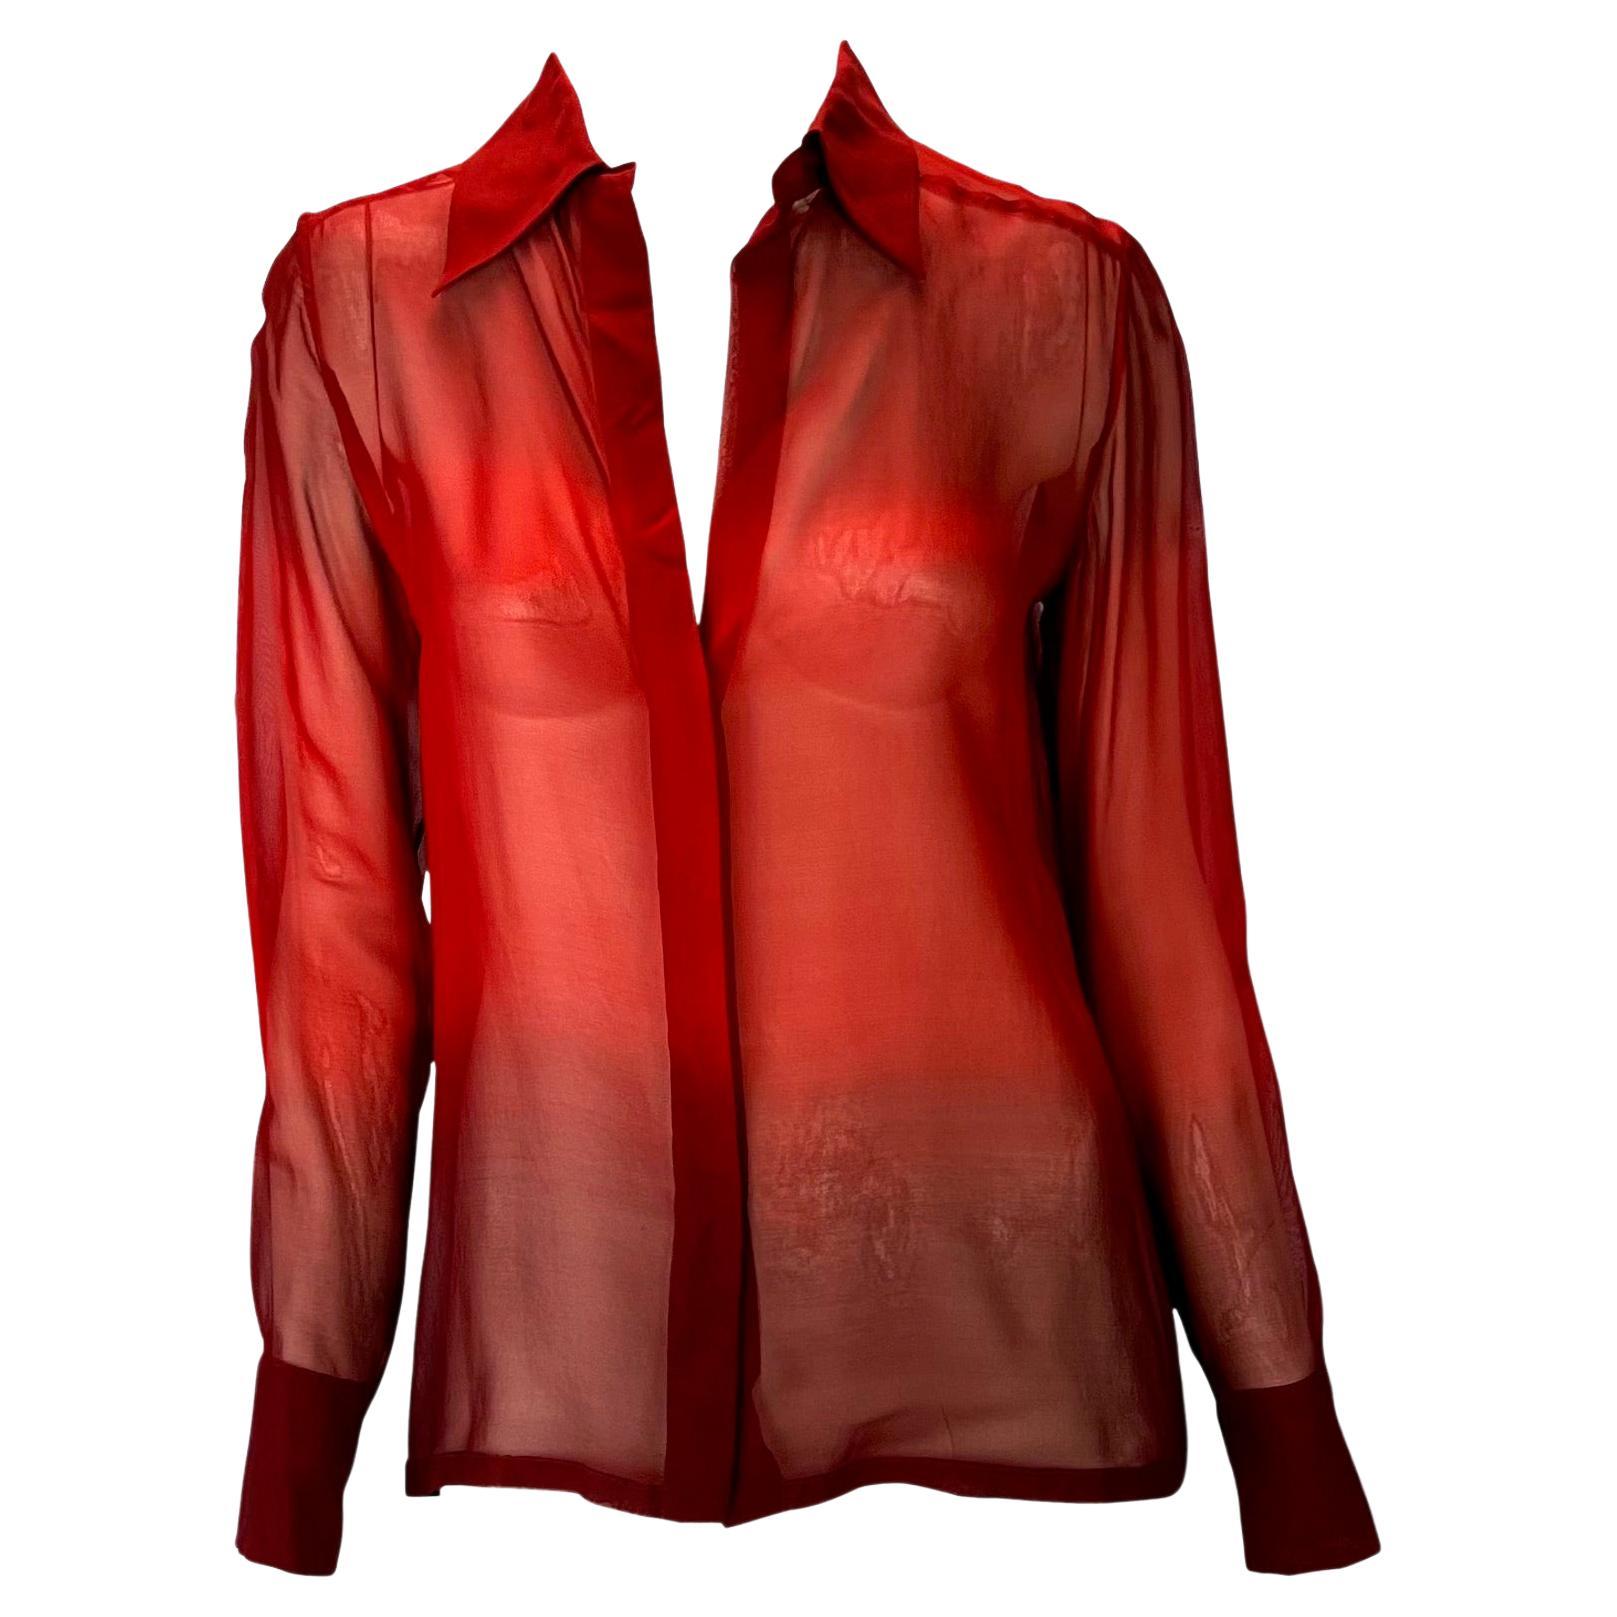 S/S 1997 Gucci by Tom Ford Red Ombré Sheer Silk Oversized Tunic Top For Sale